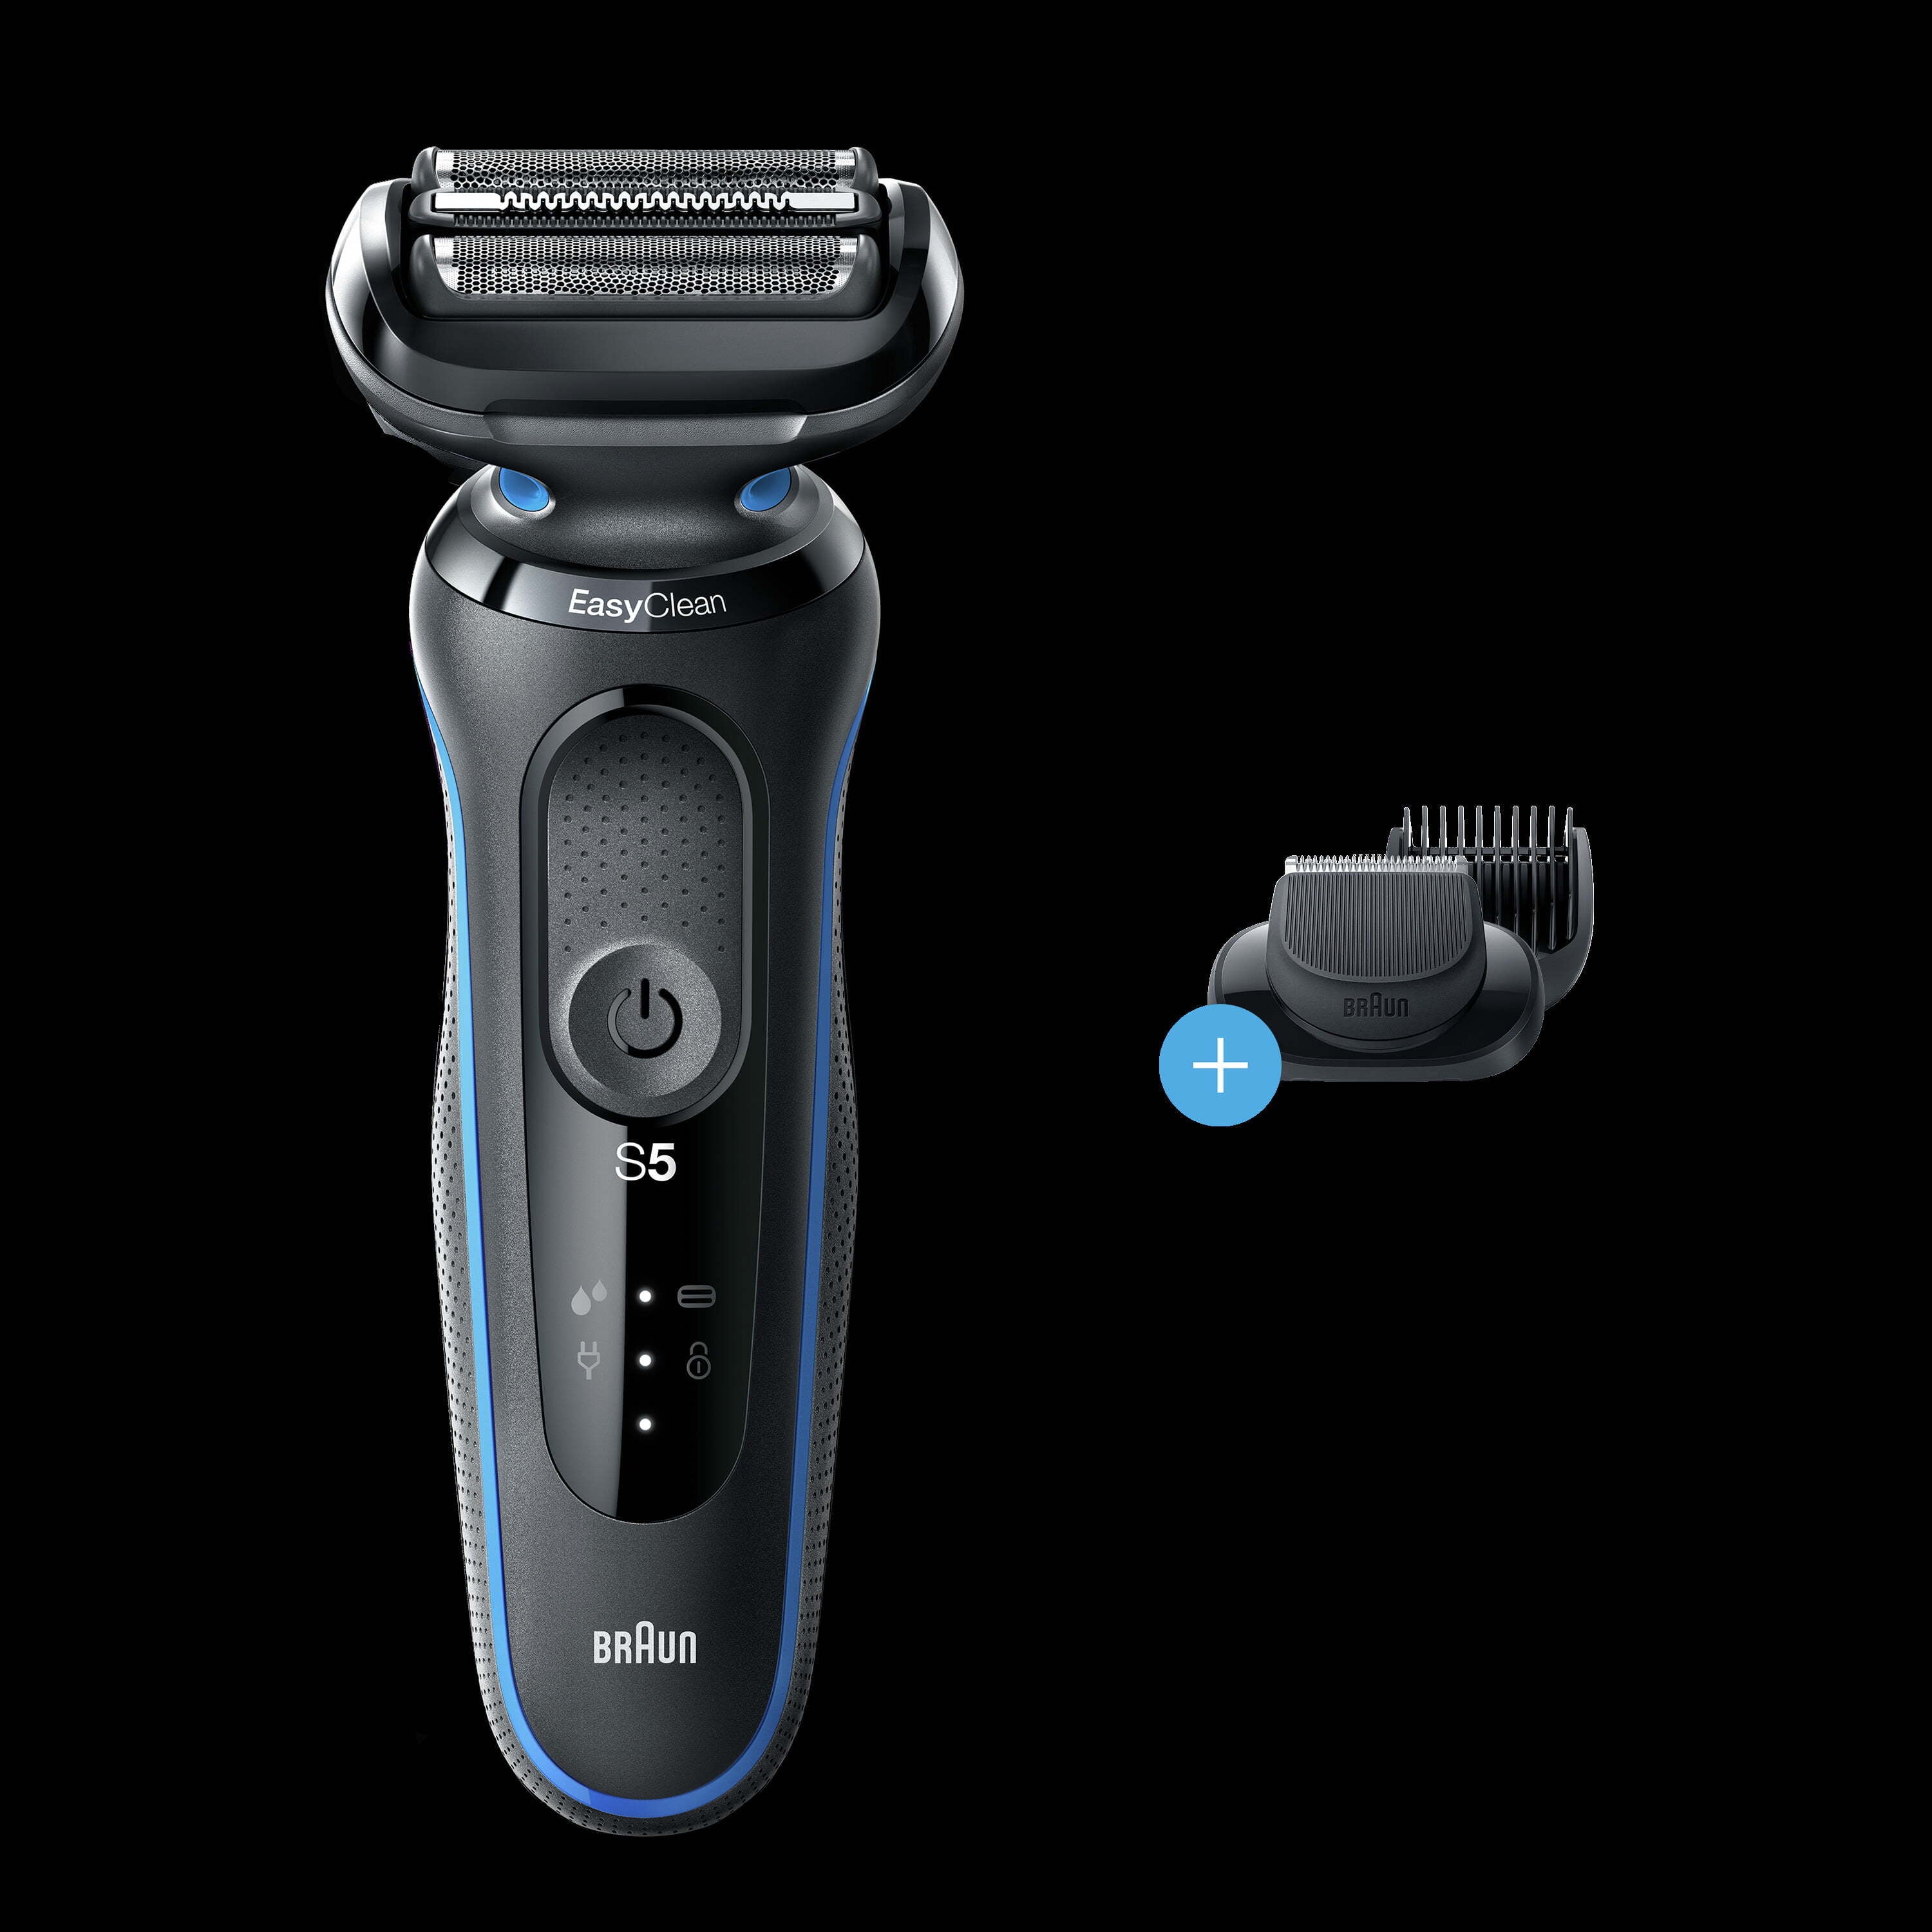  Braun Series 5 5020 Electric Razor for Men Foil Shaver with  Beard Trimmer, Rechargeable, Wet & Dry with EasyClean, Black, 5 Piece Set :  Beauty & Personal Care